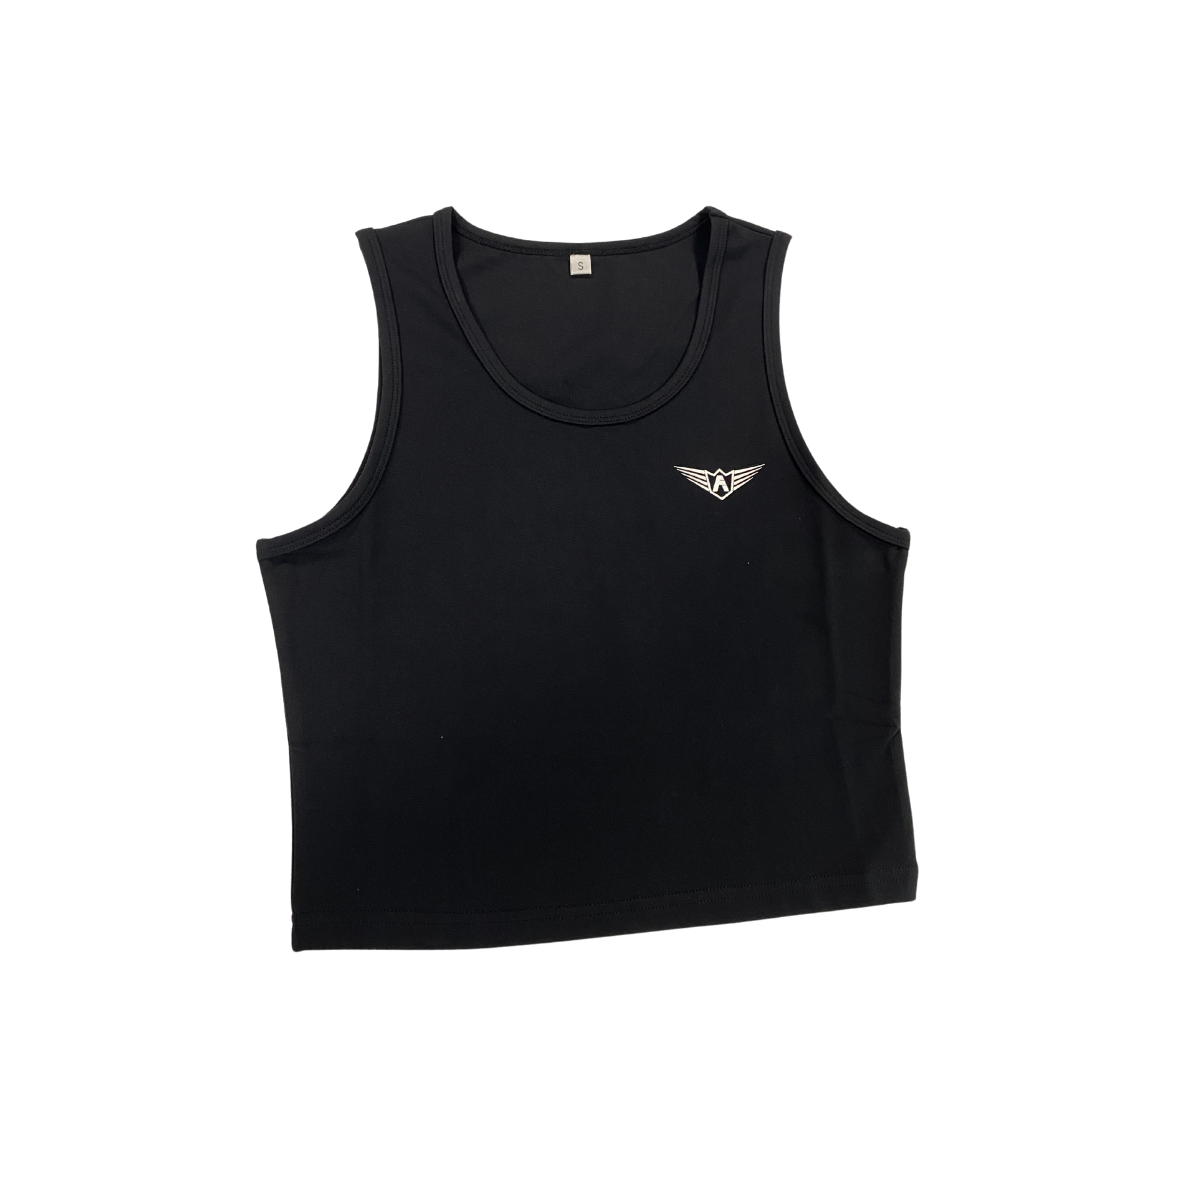 Black Cross Training Camisole-Vetements-Fit Army-S-Canada Fighting